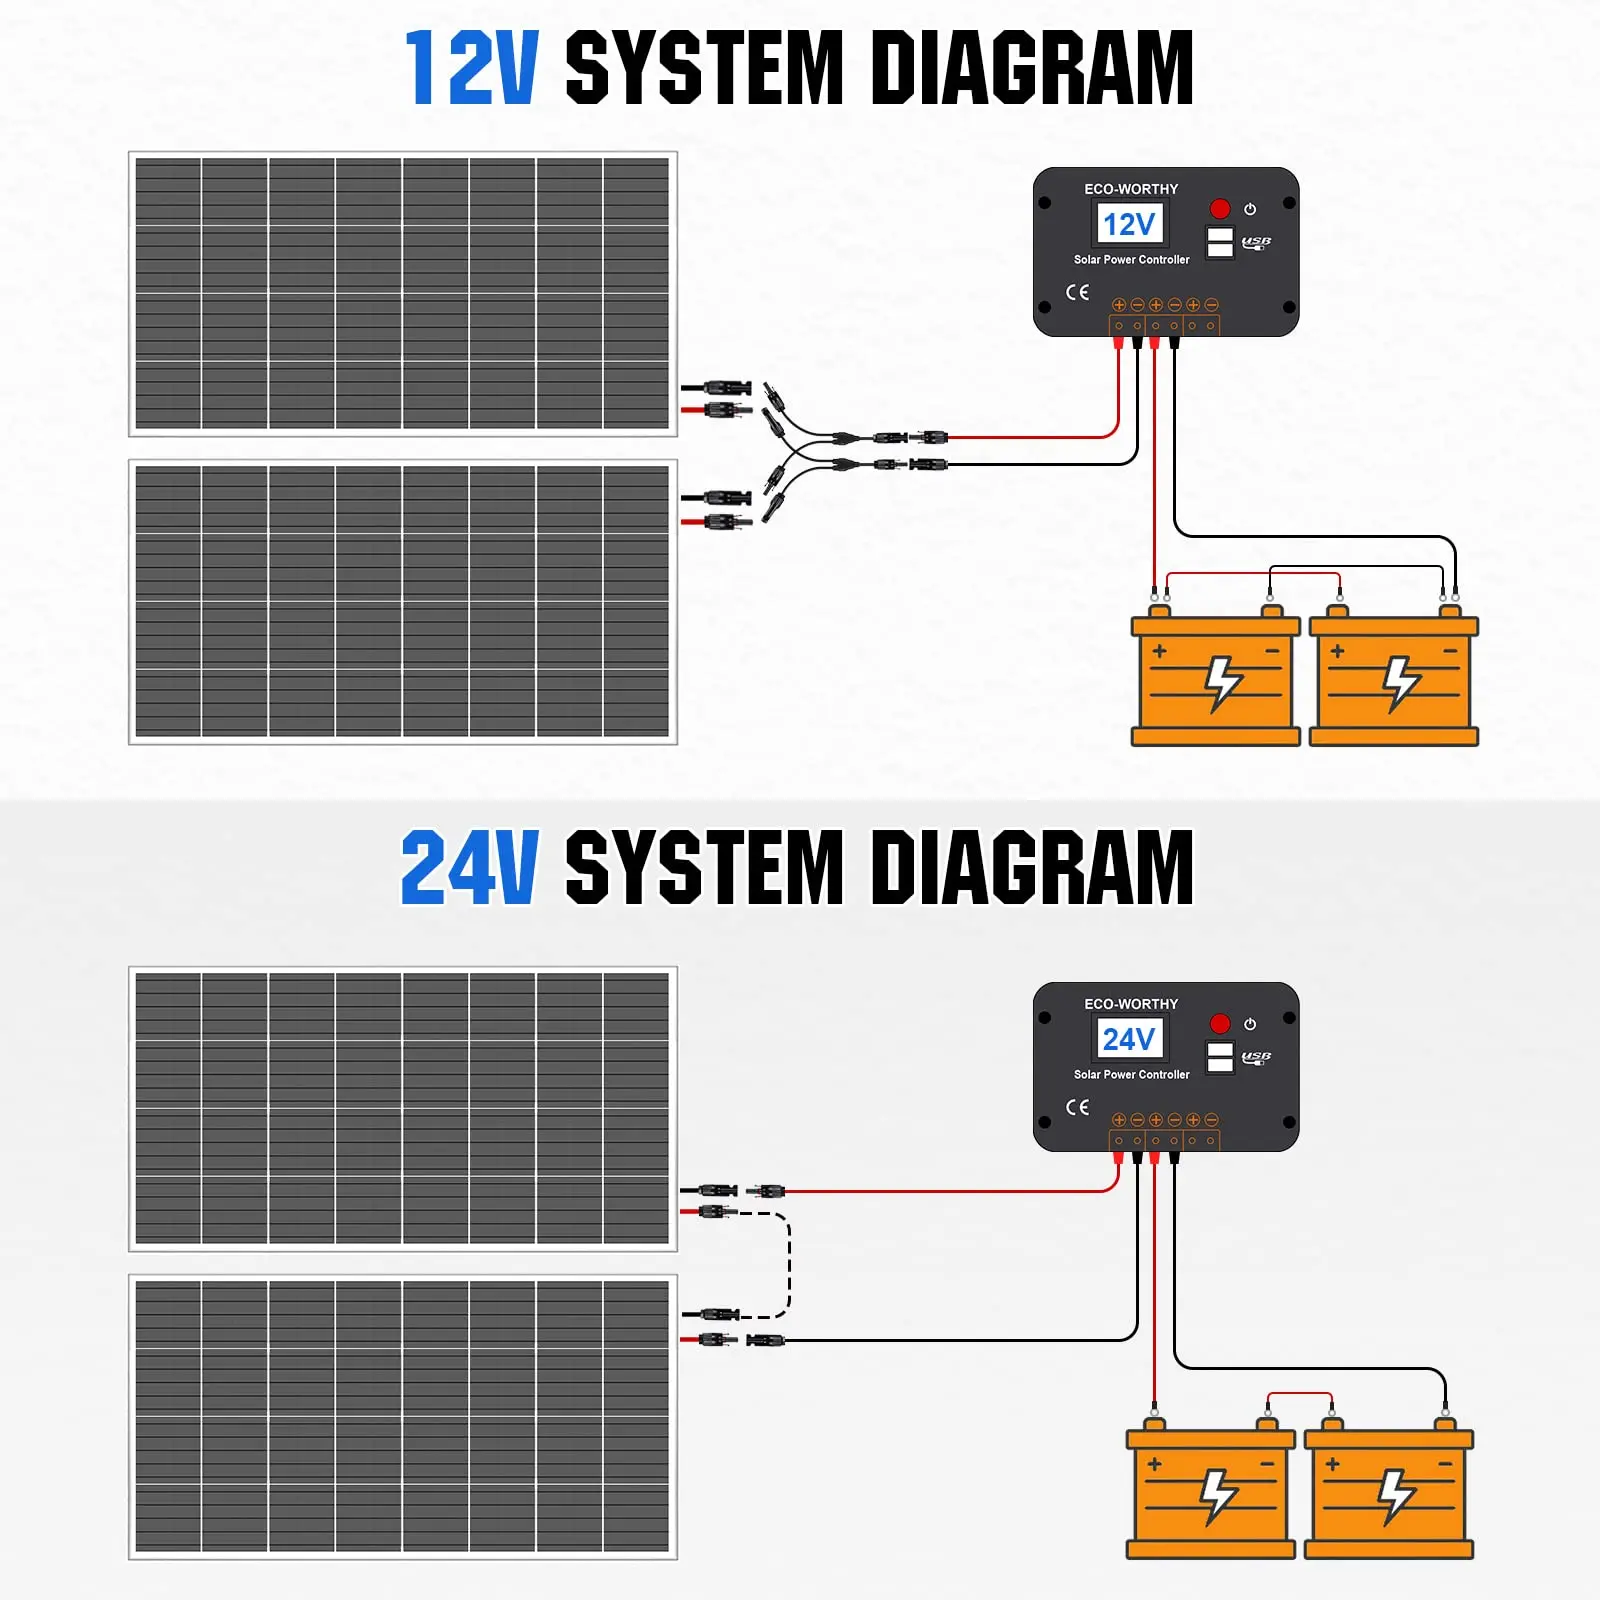 24 v solar panels to 12v - Is there a difference between 12V and 24V solar panels